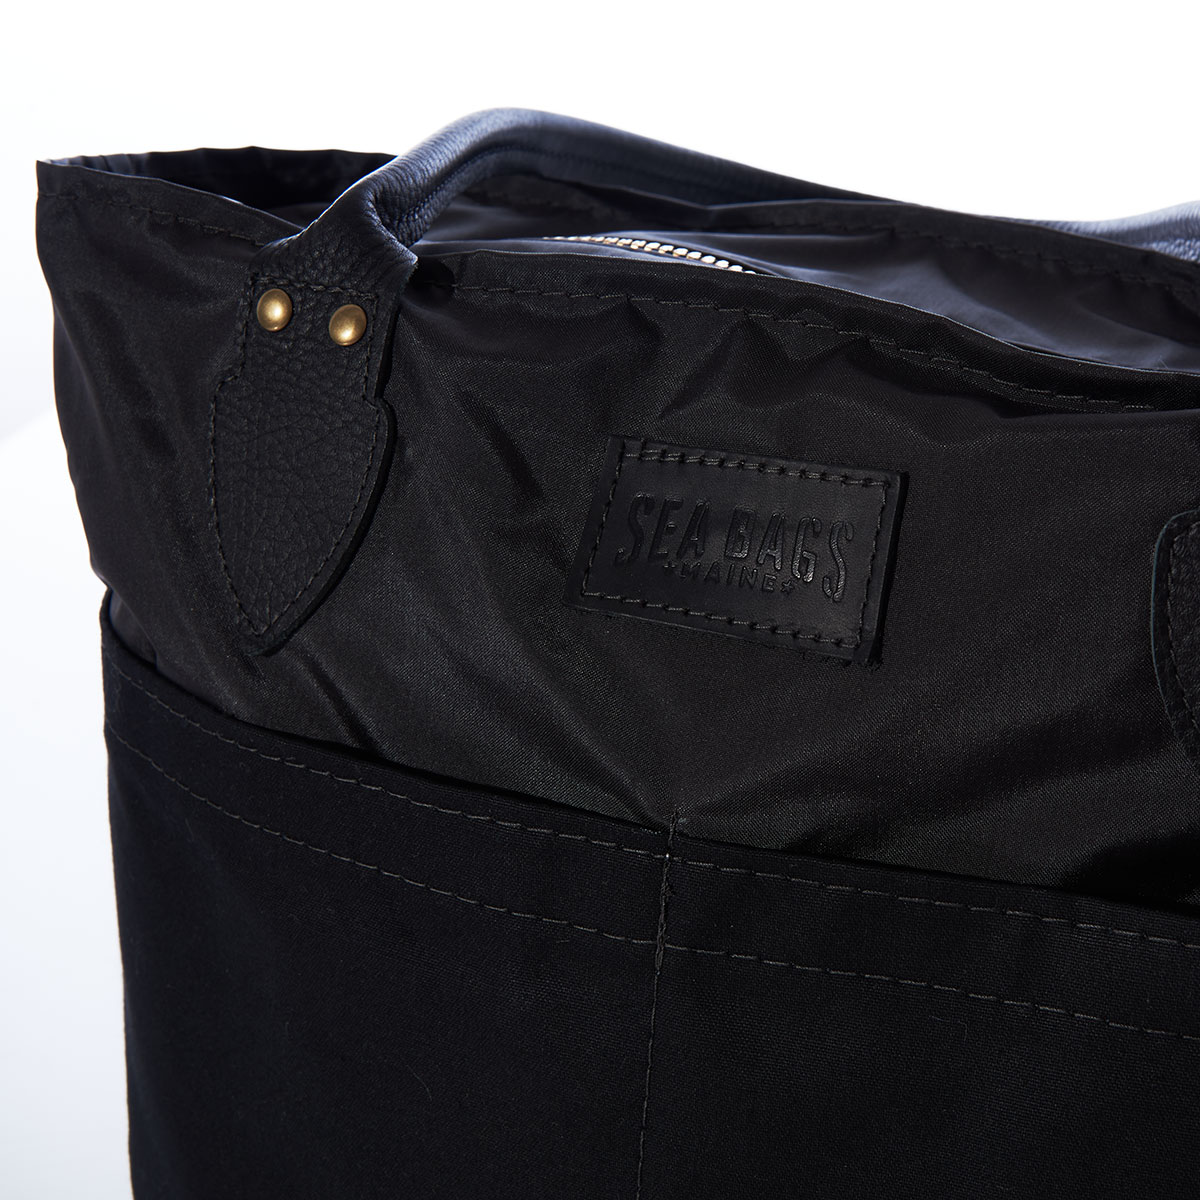 close up view of zipper closure on a black recycled sail cloth medium tote with a black canvas bottom and leather handles